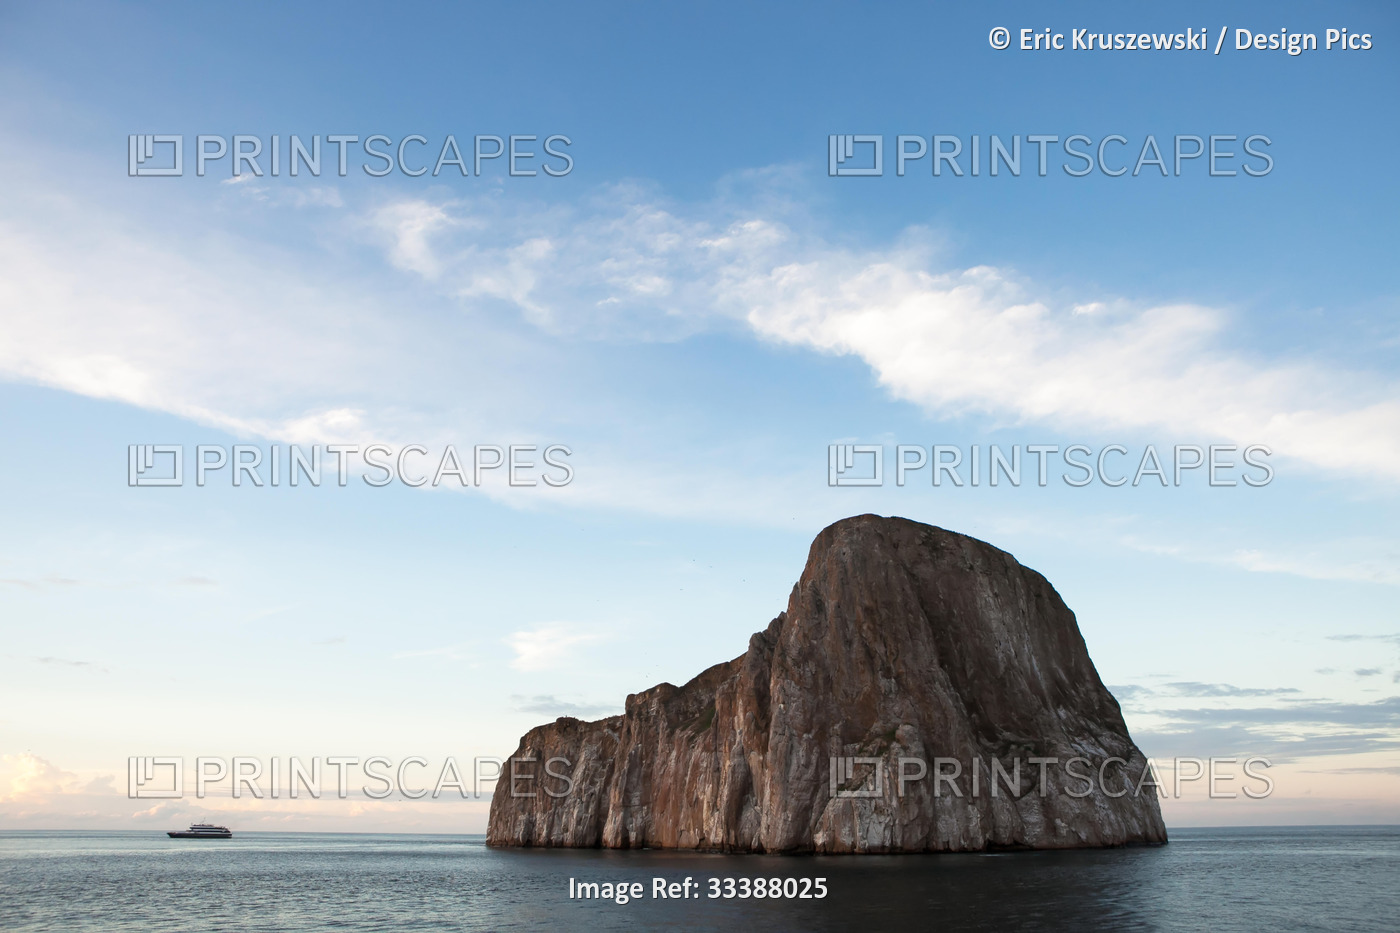 A expedition vessel passes near a large rock formation near the Galapagos ...